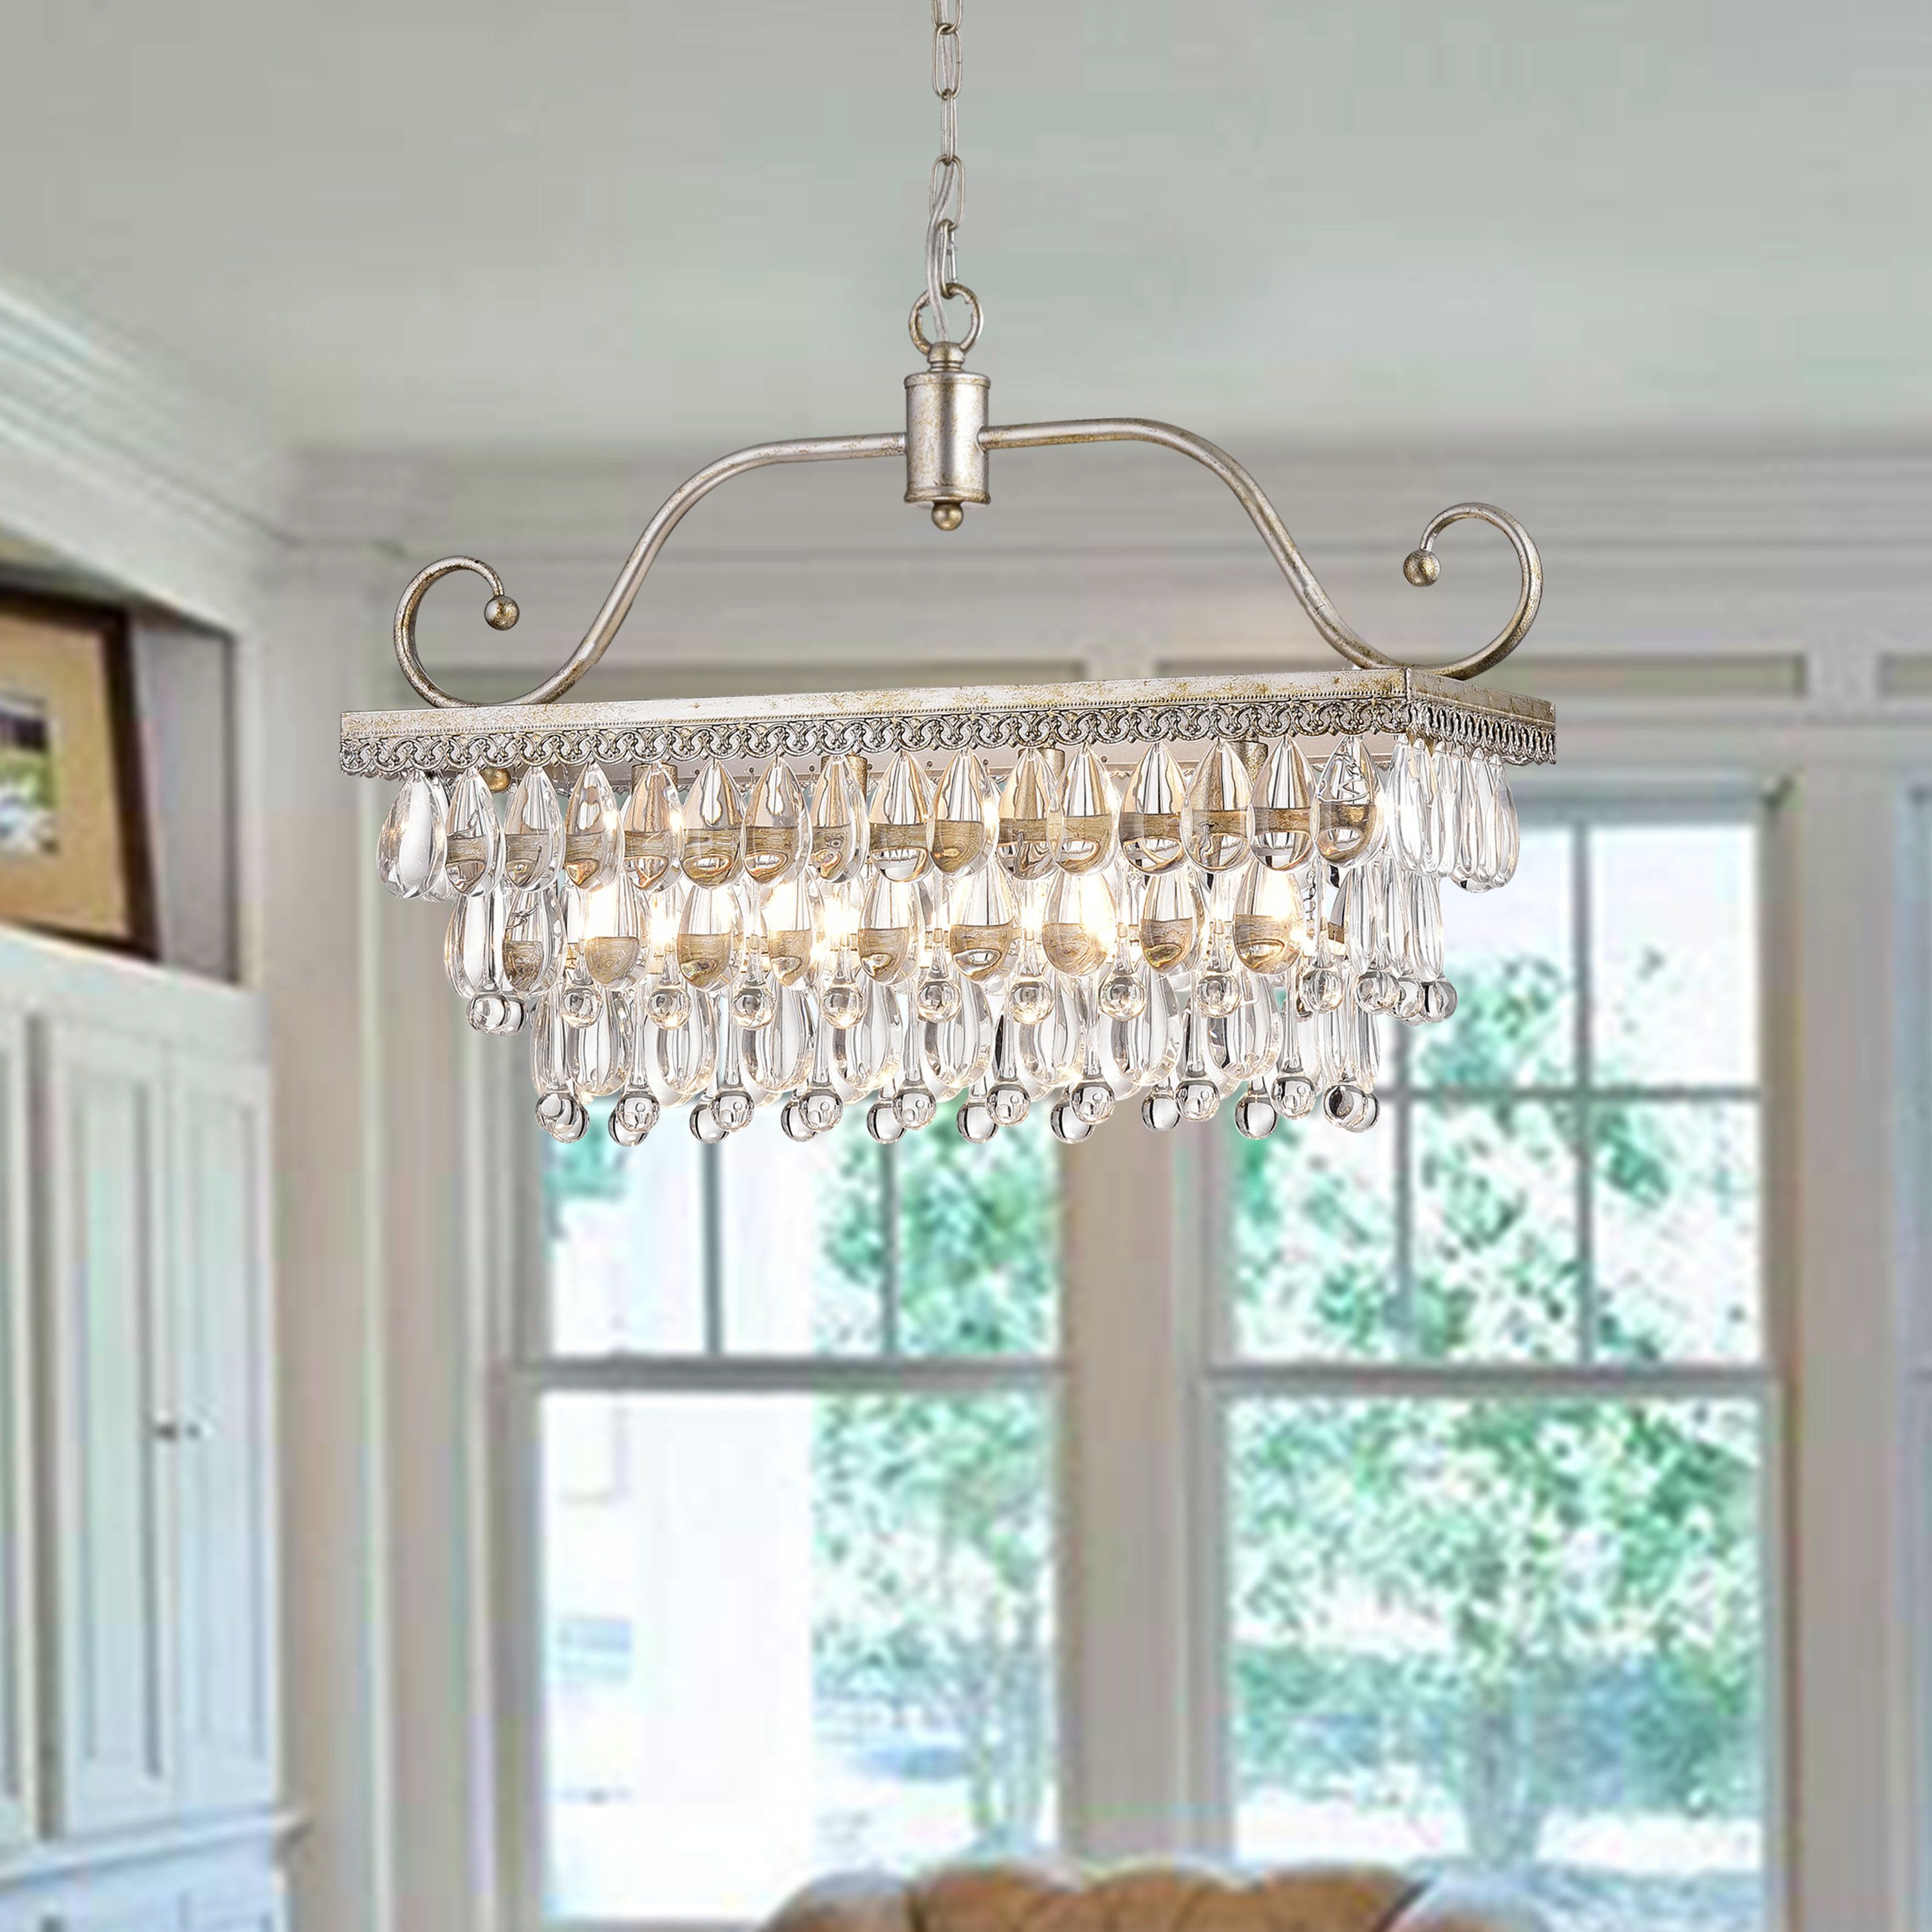 Gerhart 4 Light Crystal Chandelier Intended For Bramers 6 Light Novelty Chandeliers (View 27 of 30)